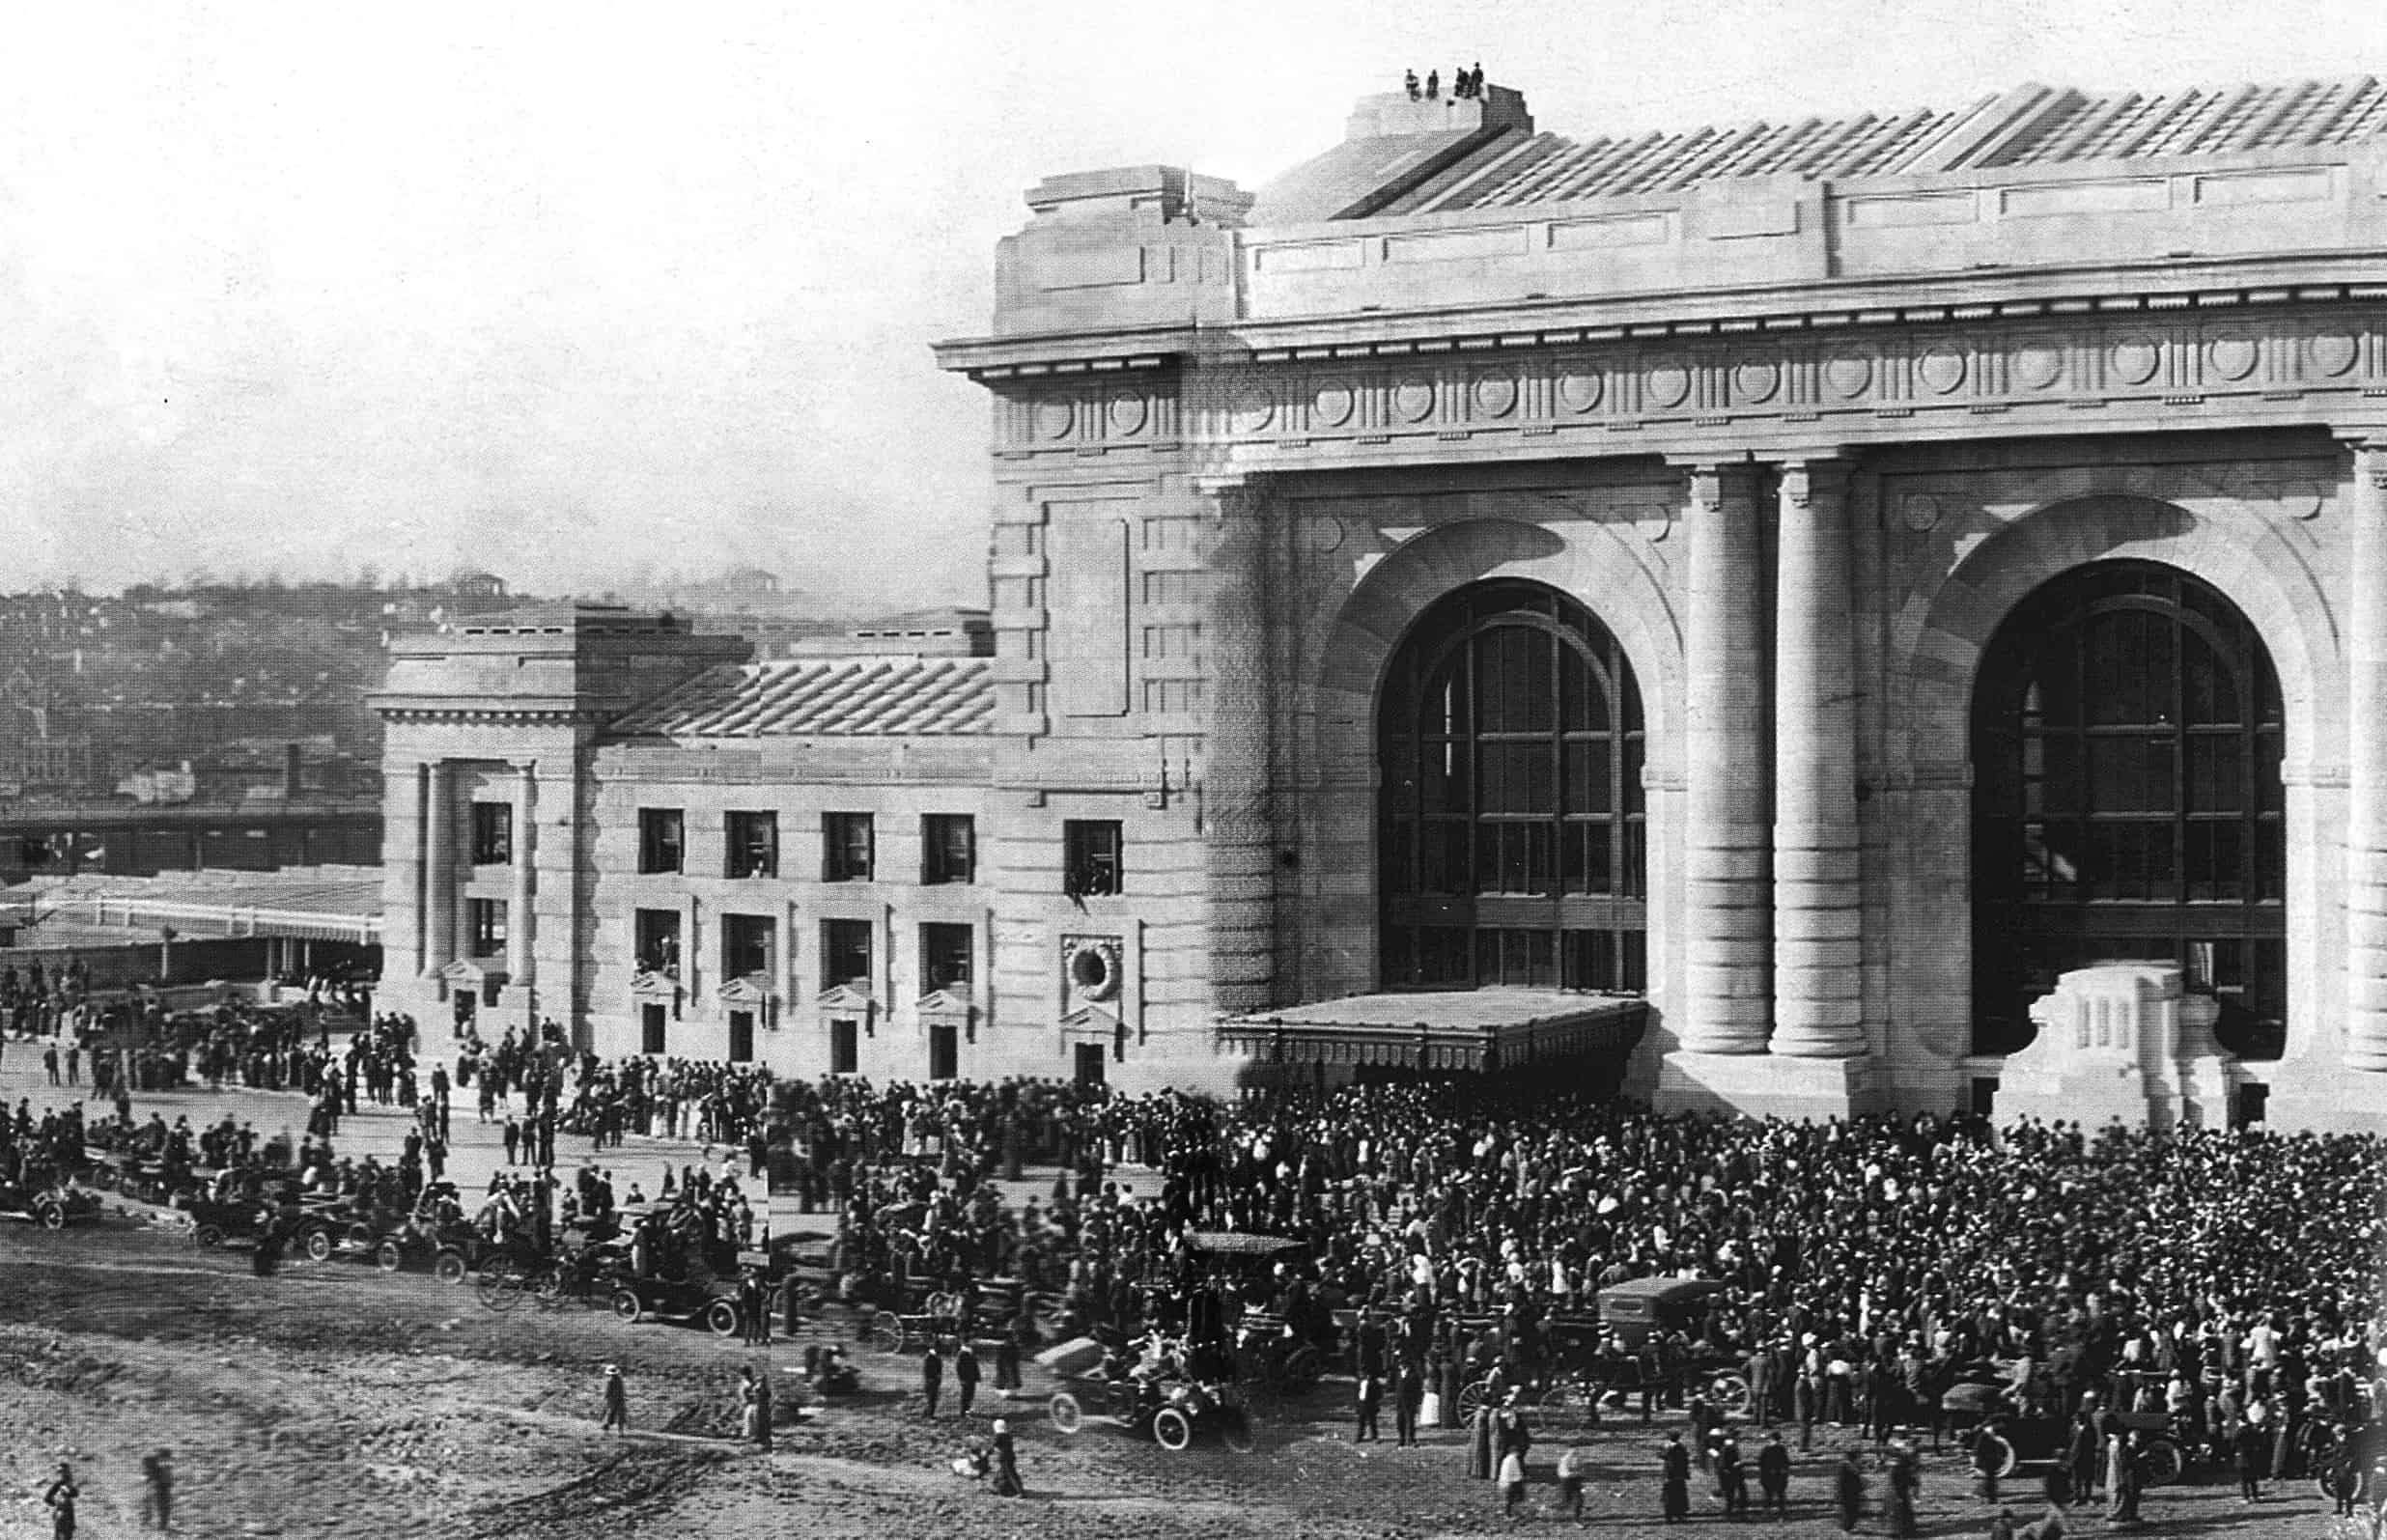 Kansas City's Union Station is pictured in 1914.